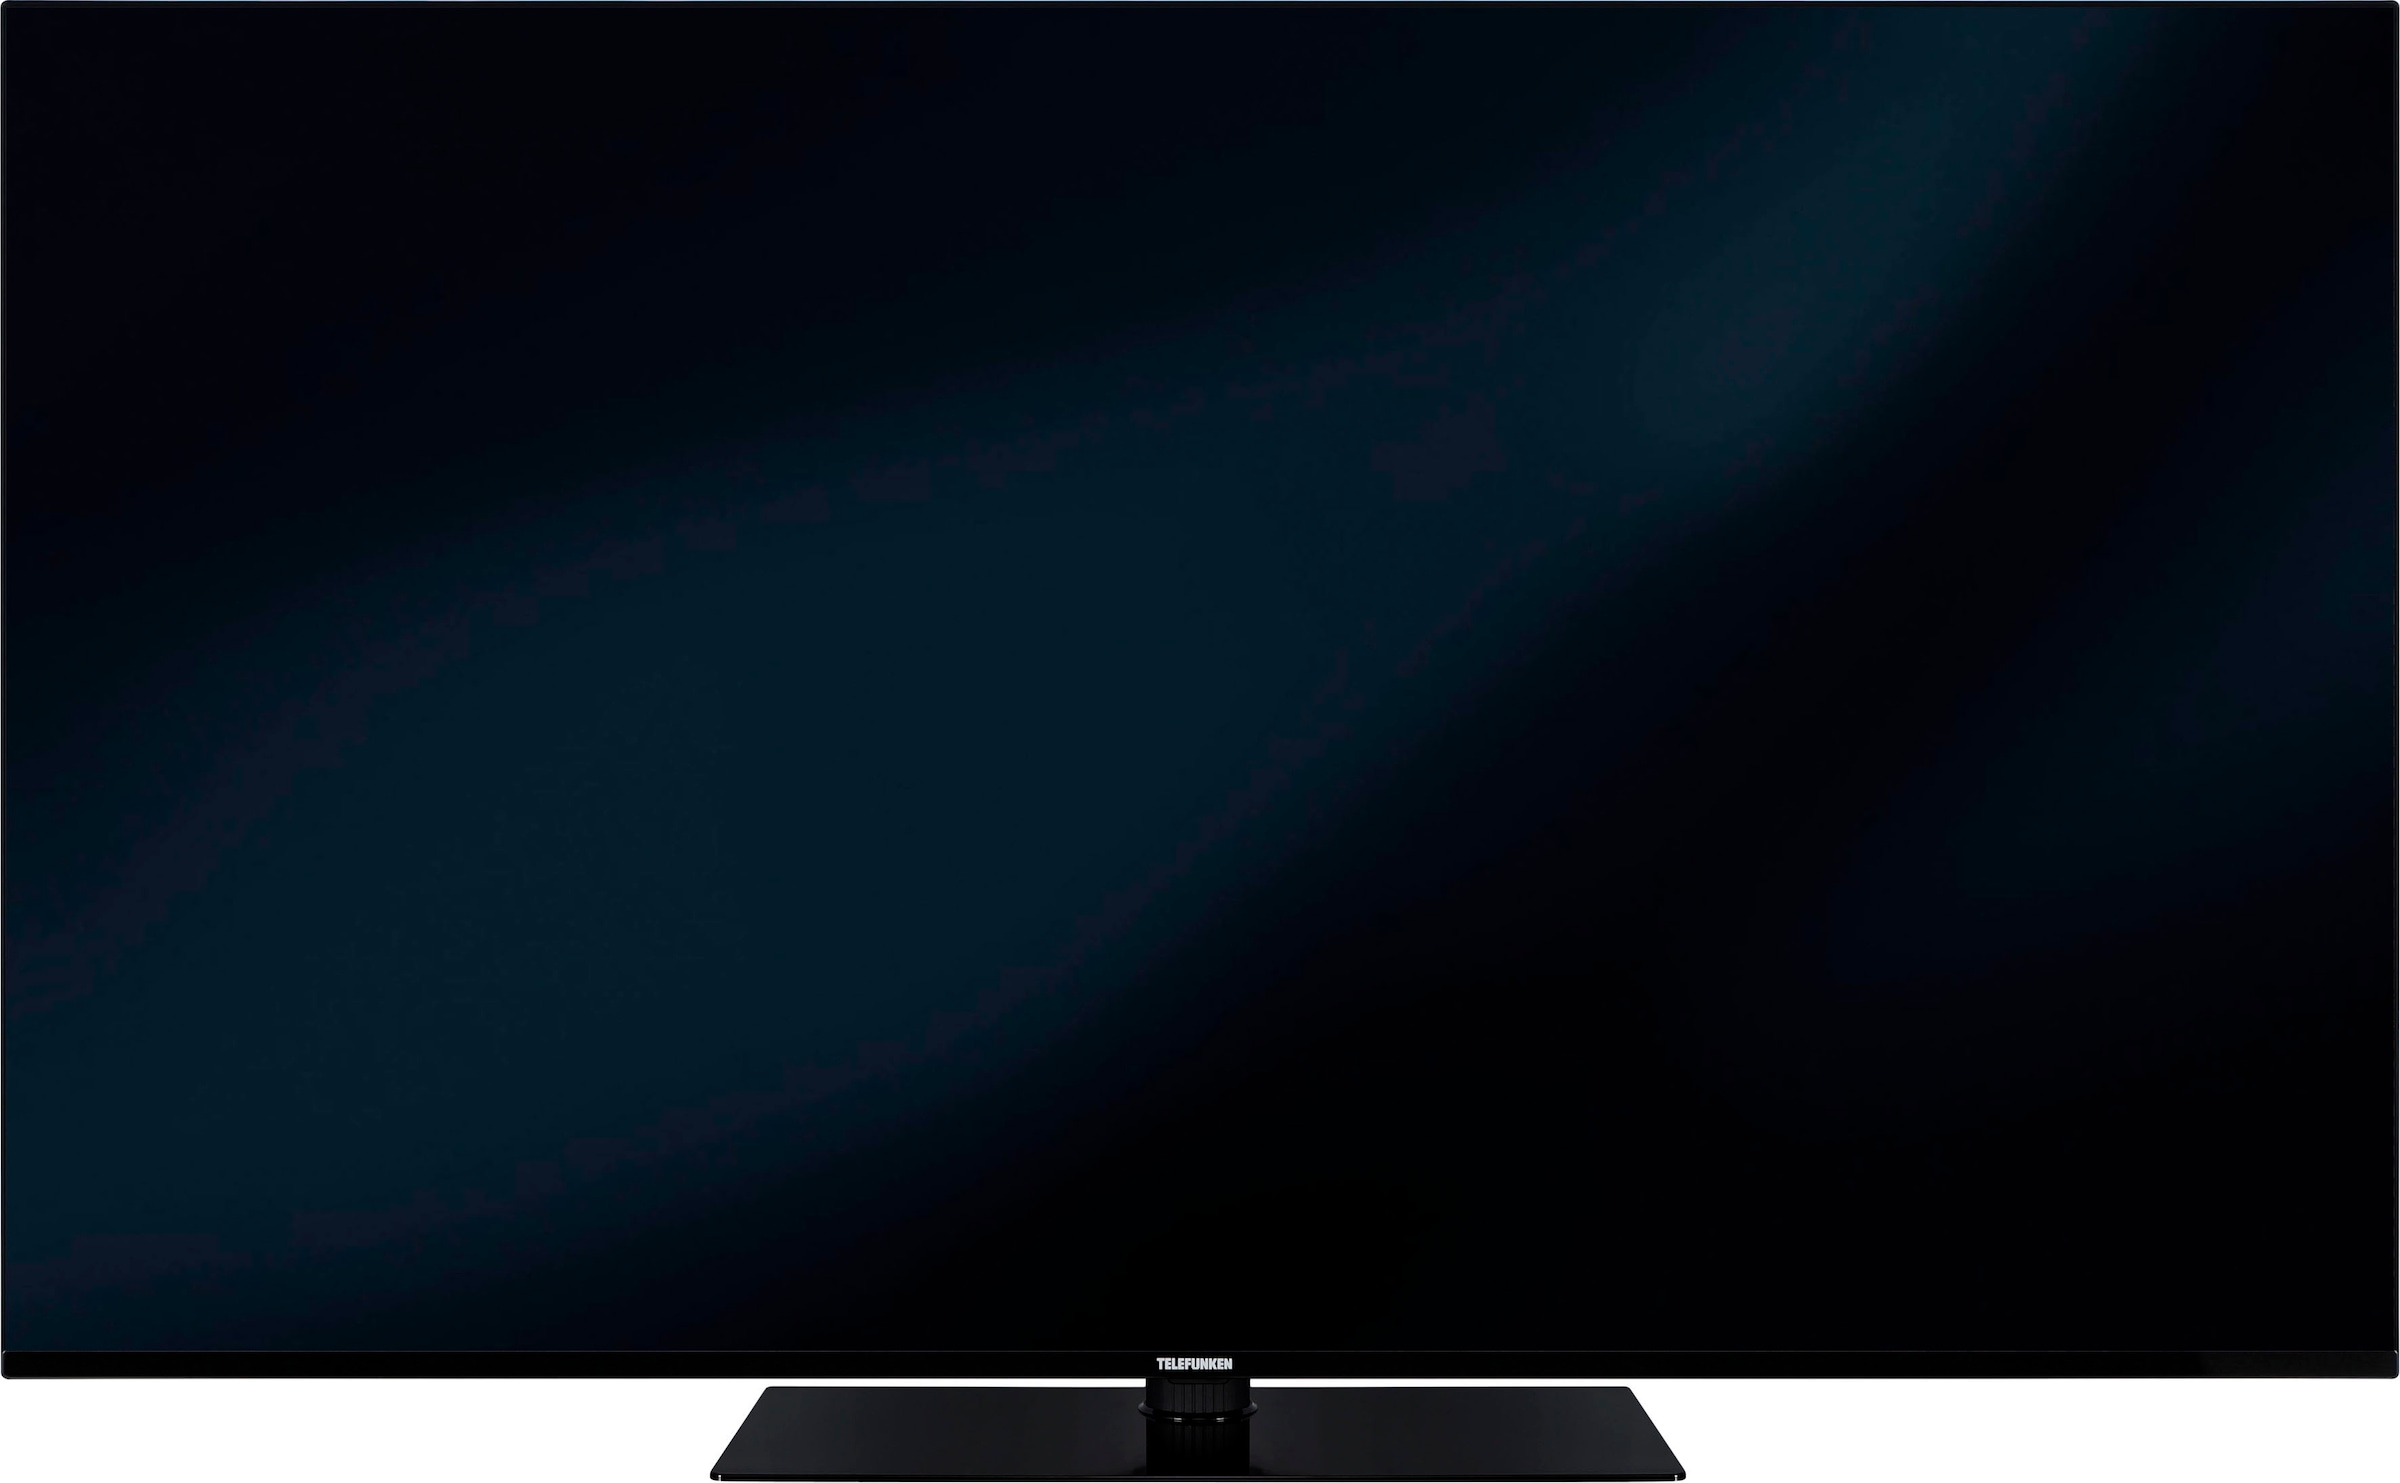 Rechnung Smart- Telefunken 4K HD, Zoll, Atmos,USB-Recording,Google 126 TV, TV-Android auf Assistent,Android-TV kaufen cm/50 Ultra Dolby LED-Fernseher »D50V950M2CWH«,